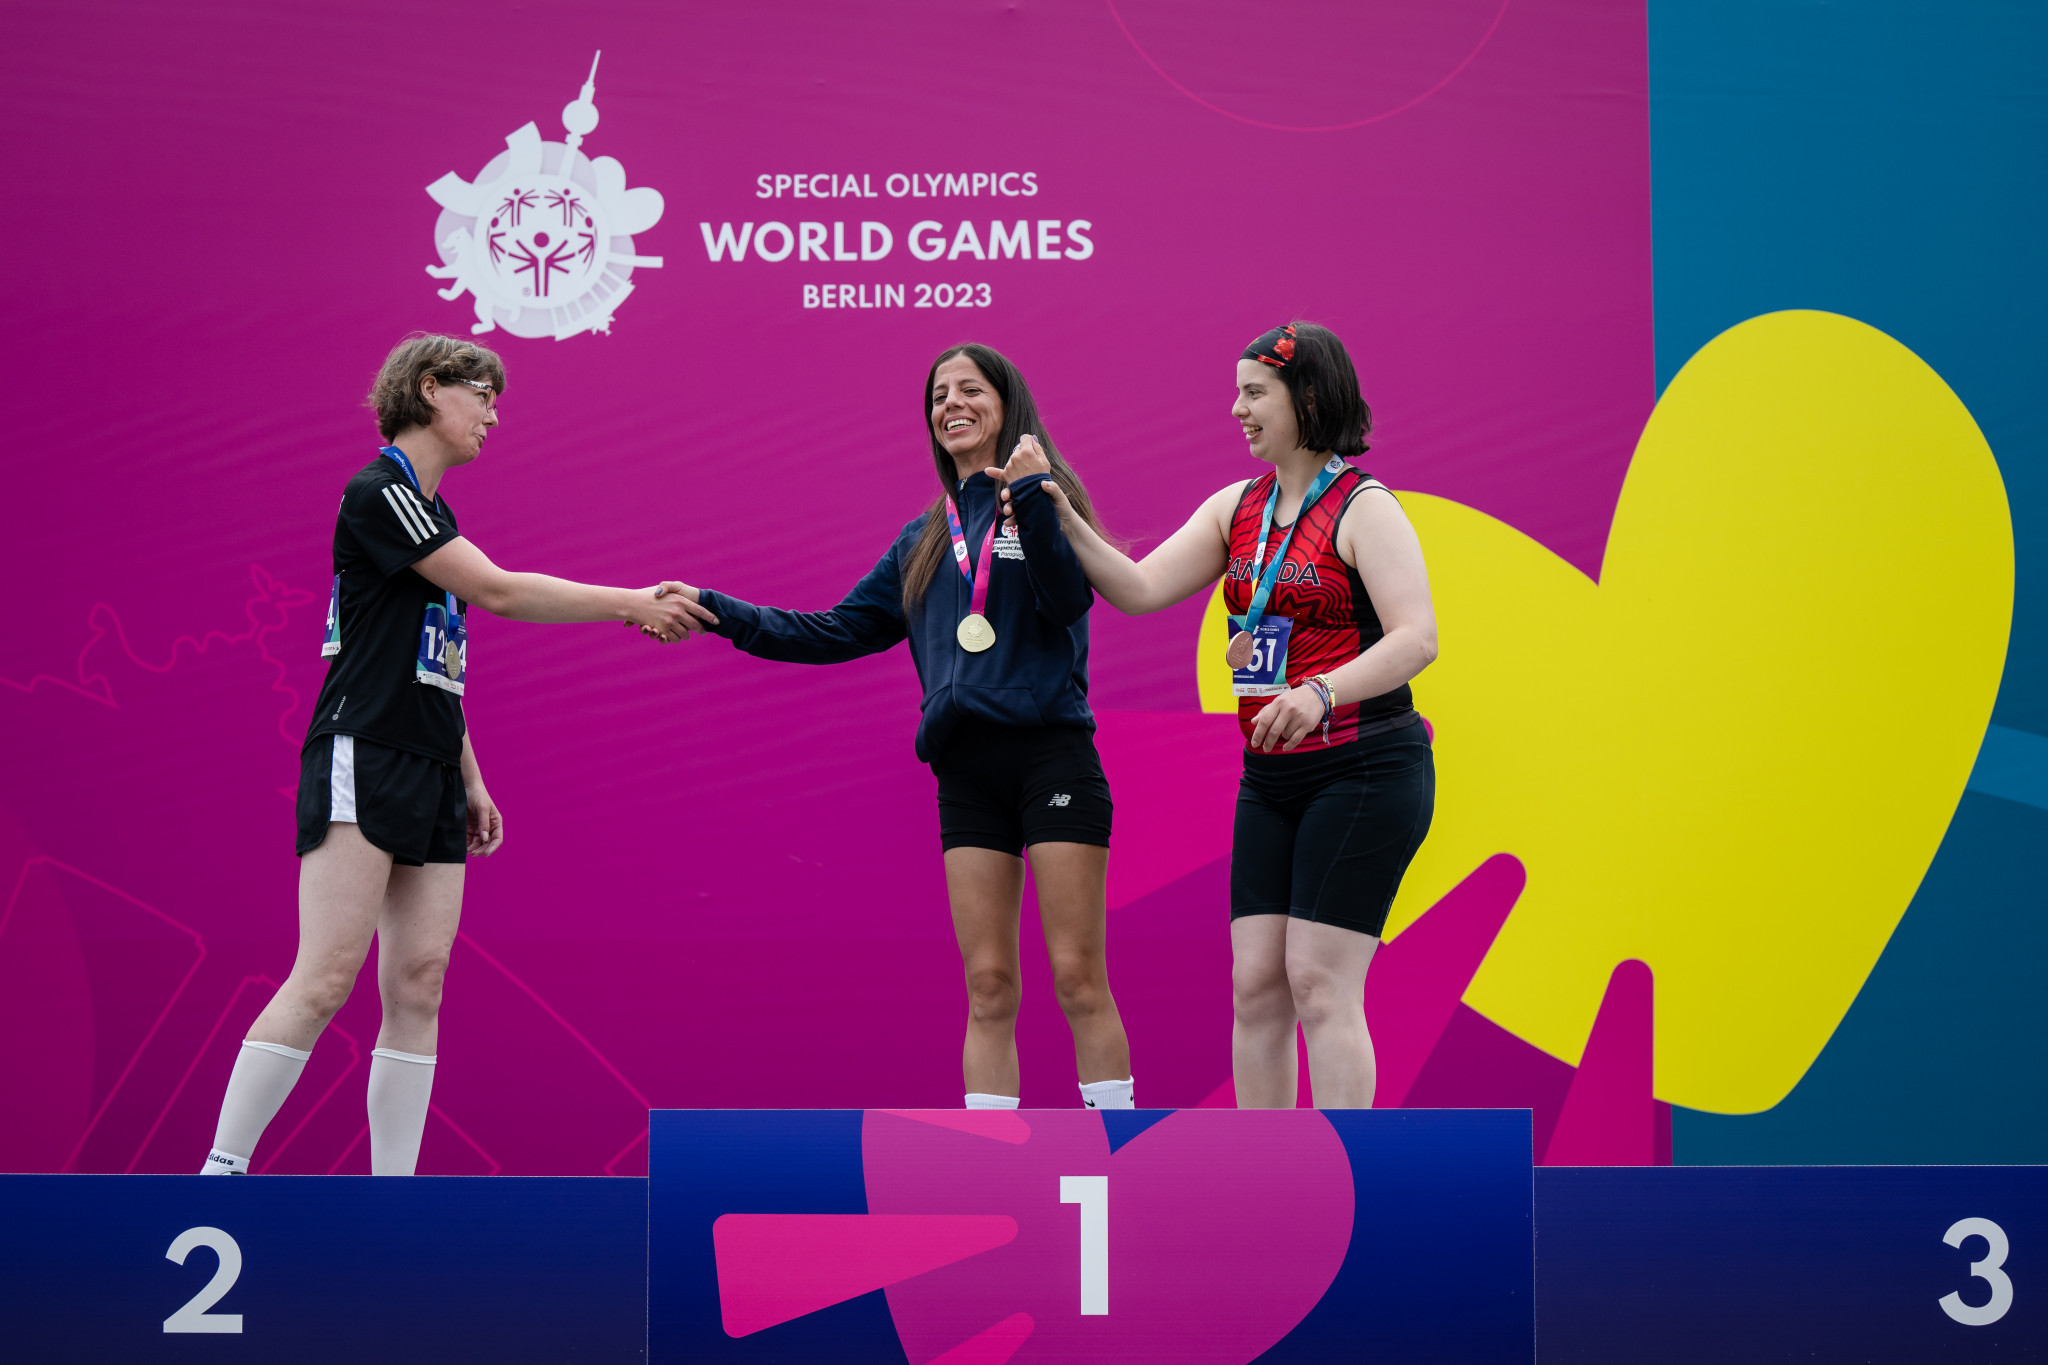 Paraguay's Monica Prieto, centre, was among the first athletics gold medallists in the 5,000m ©Special Olympics World Games Berlin 2023